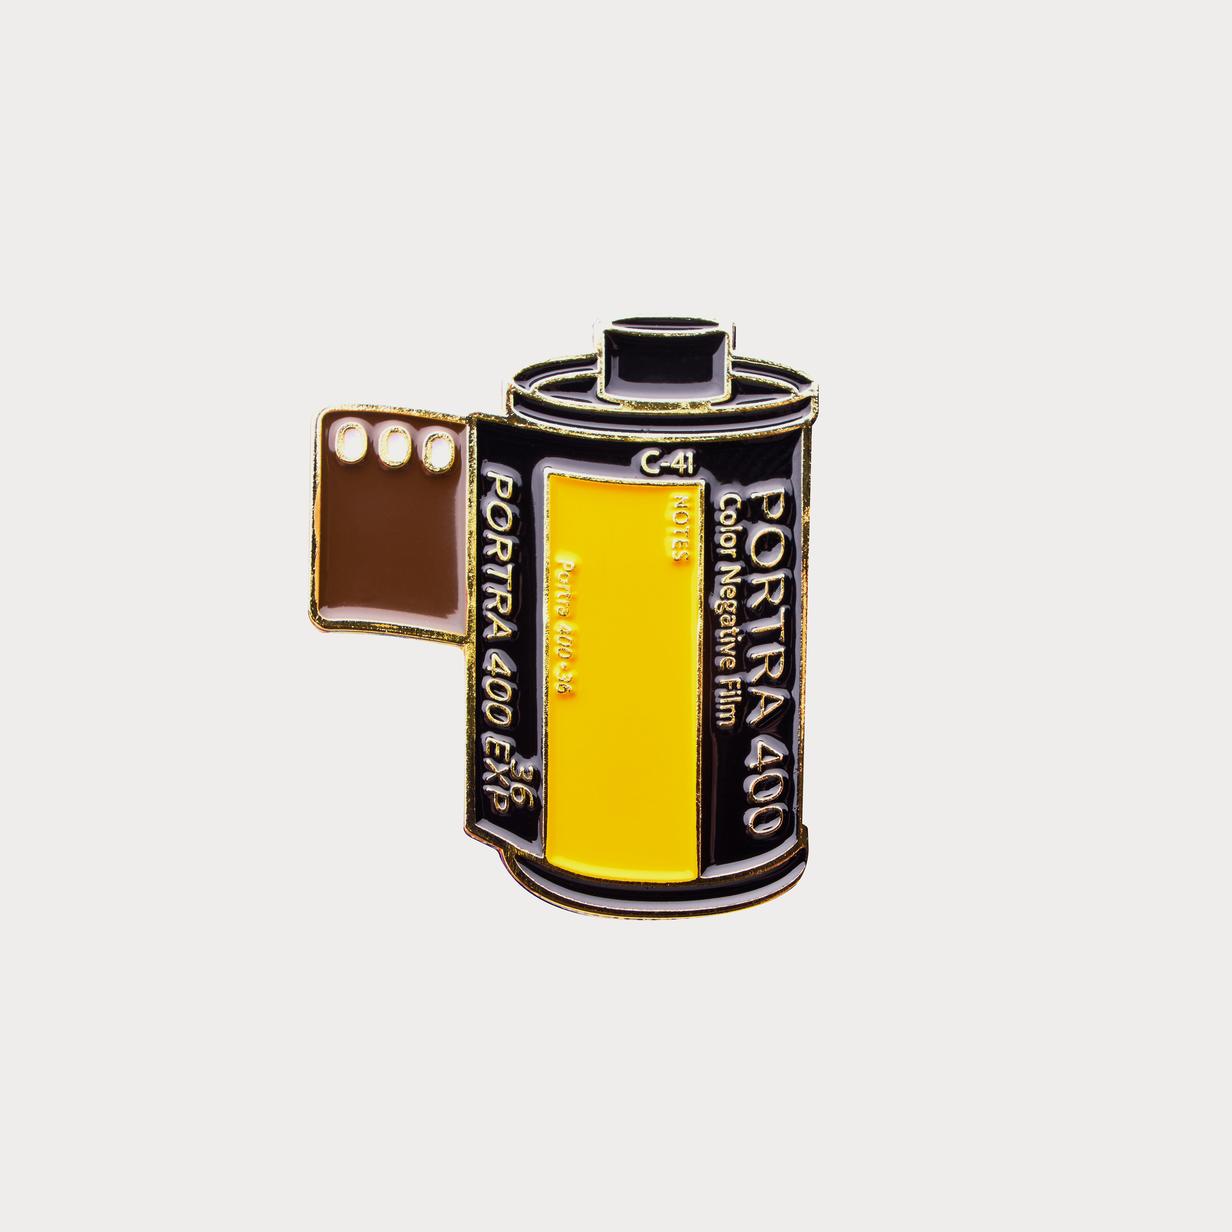 Moment Official Exclusive SKU 612608886247 Film Canister 2 Pin 01